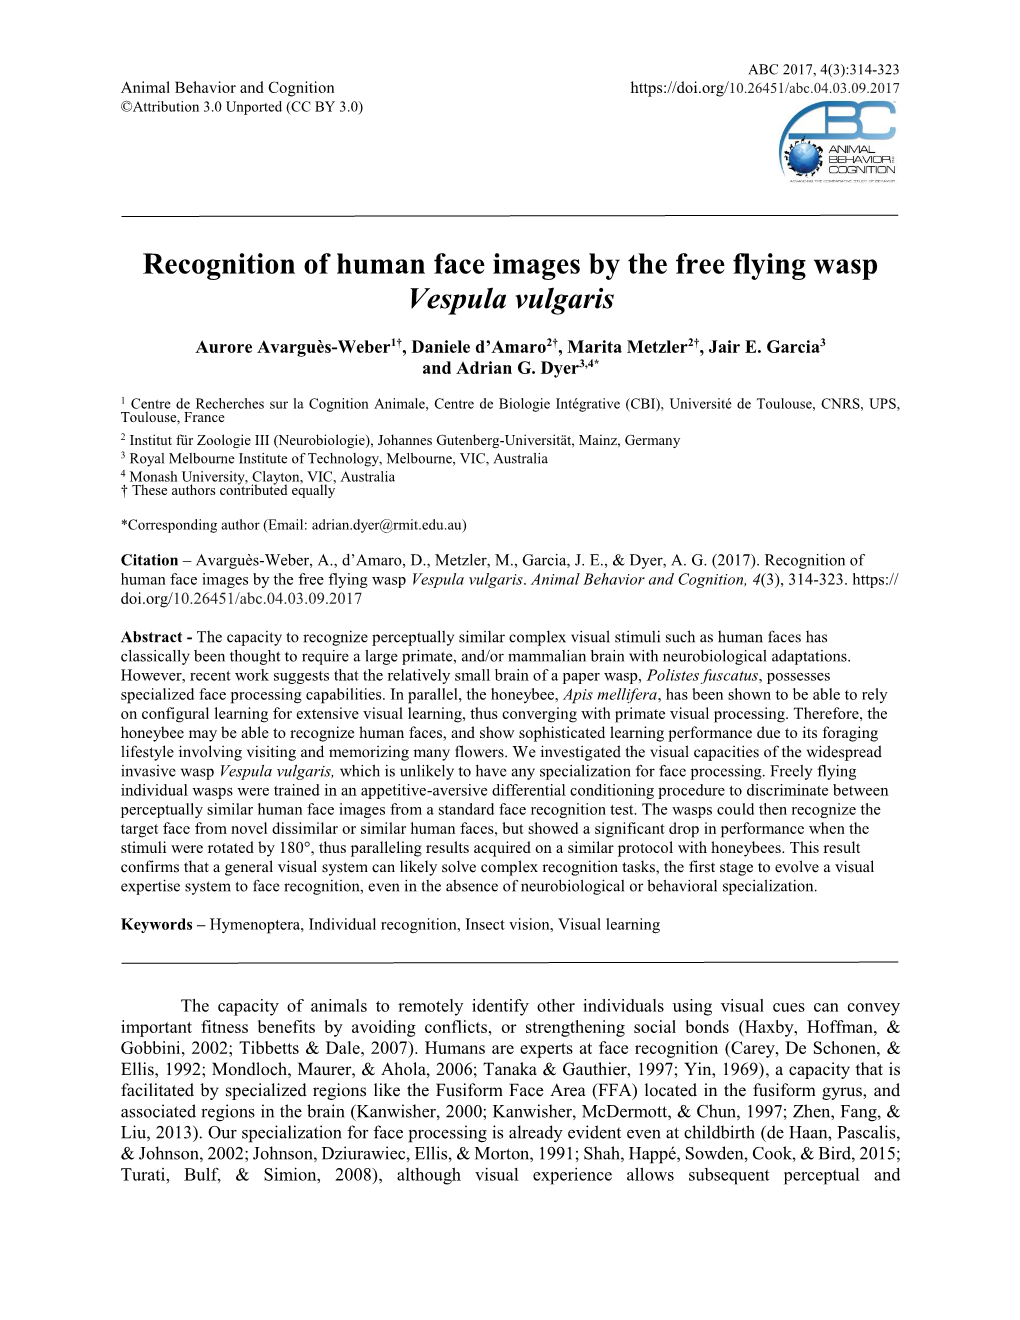 Recognition of Human Face Images by the Free Flying Wasp Vespula Vulgaris